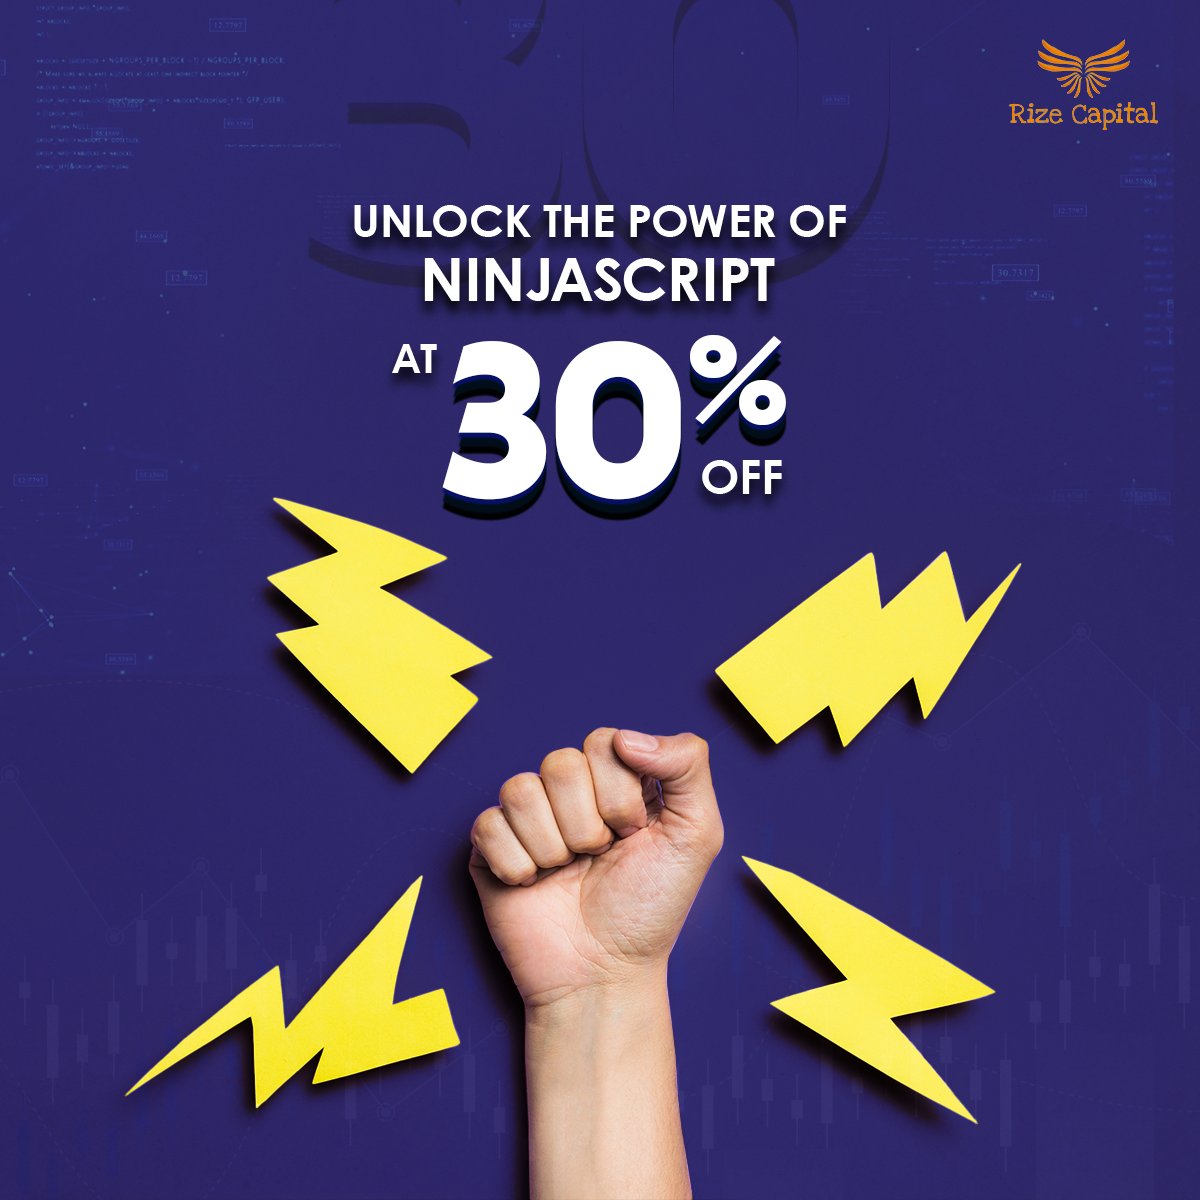 Level up your trading expertise with our Advanced NinjaScript Mastery course at a whopping 30% off! Don't wait. Seize this special offer now.  For More Information Go To, Our Website: rizecap.com/training-cours… #NinjaTrader #NinjaScript #RizeCapital #course #advancelevel